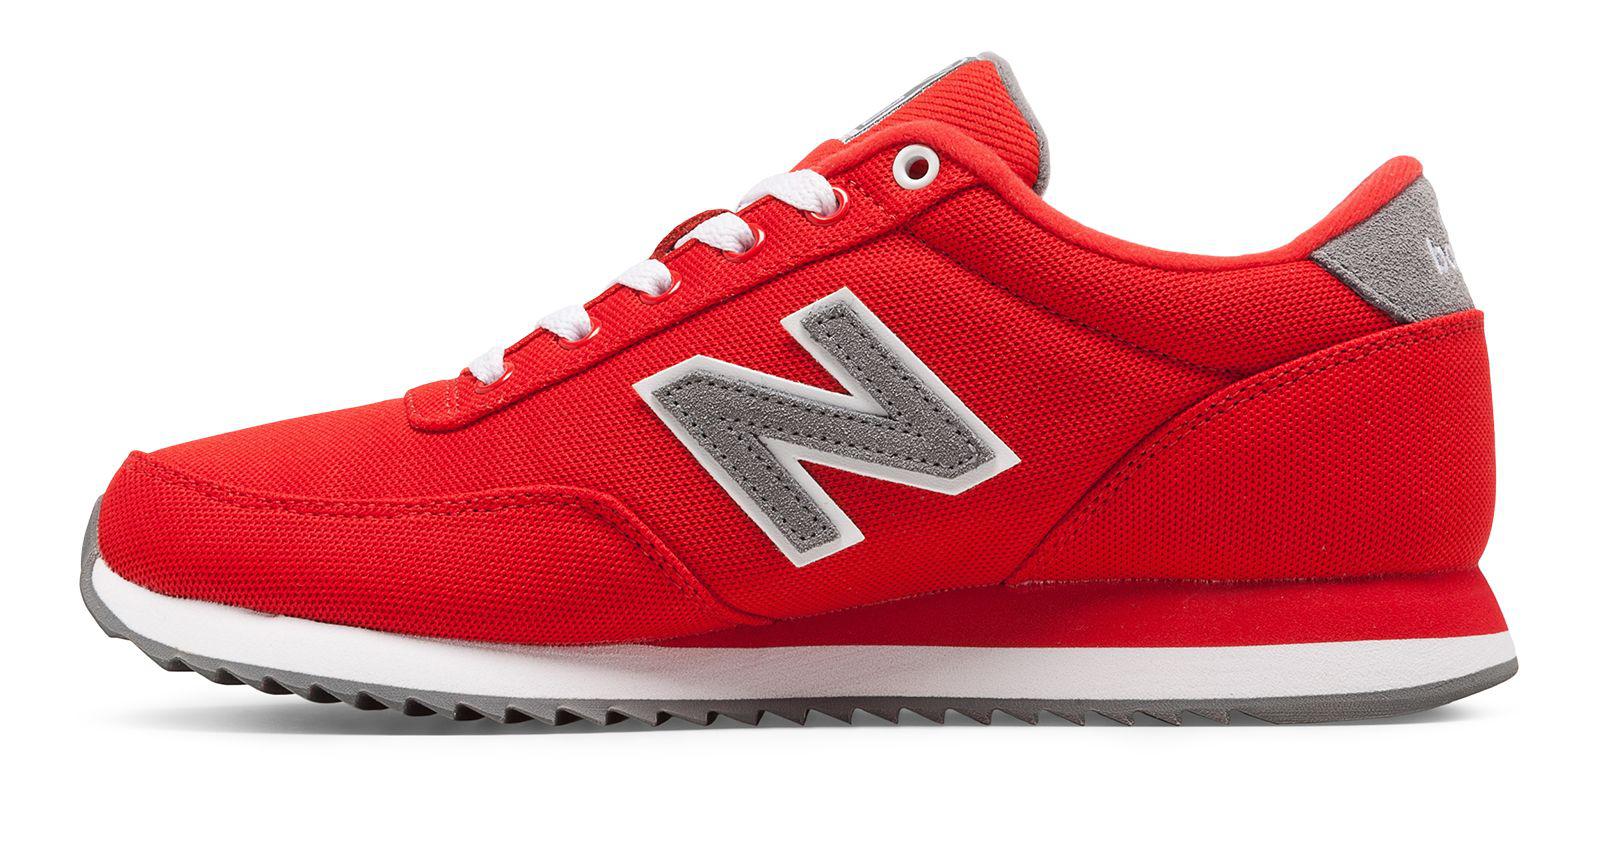 New Balance 501 Ripple Sole in Red | Lyst